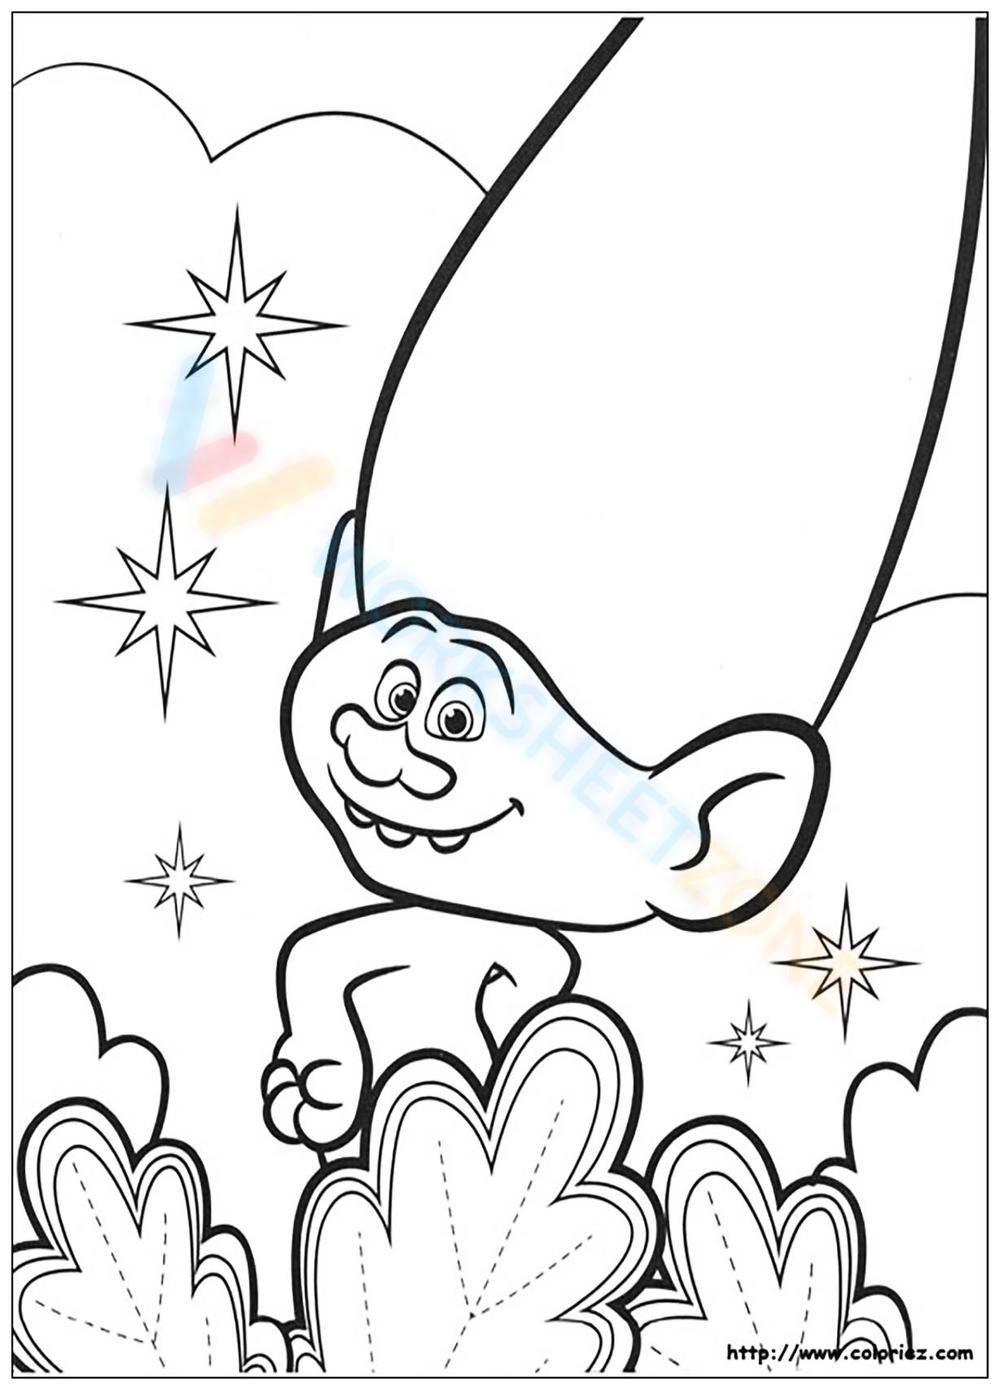 trolls the movie coloring pages